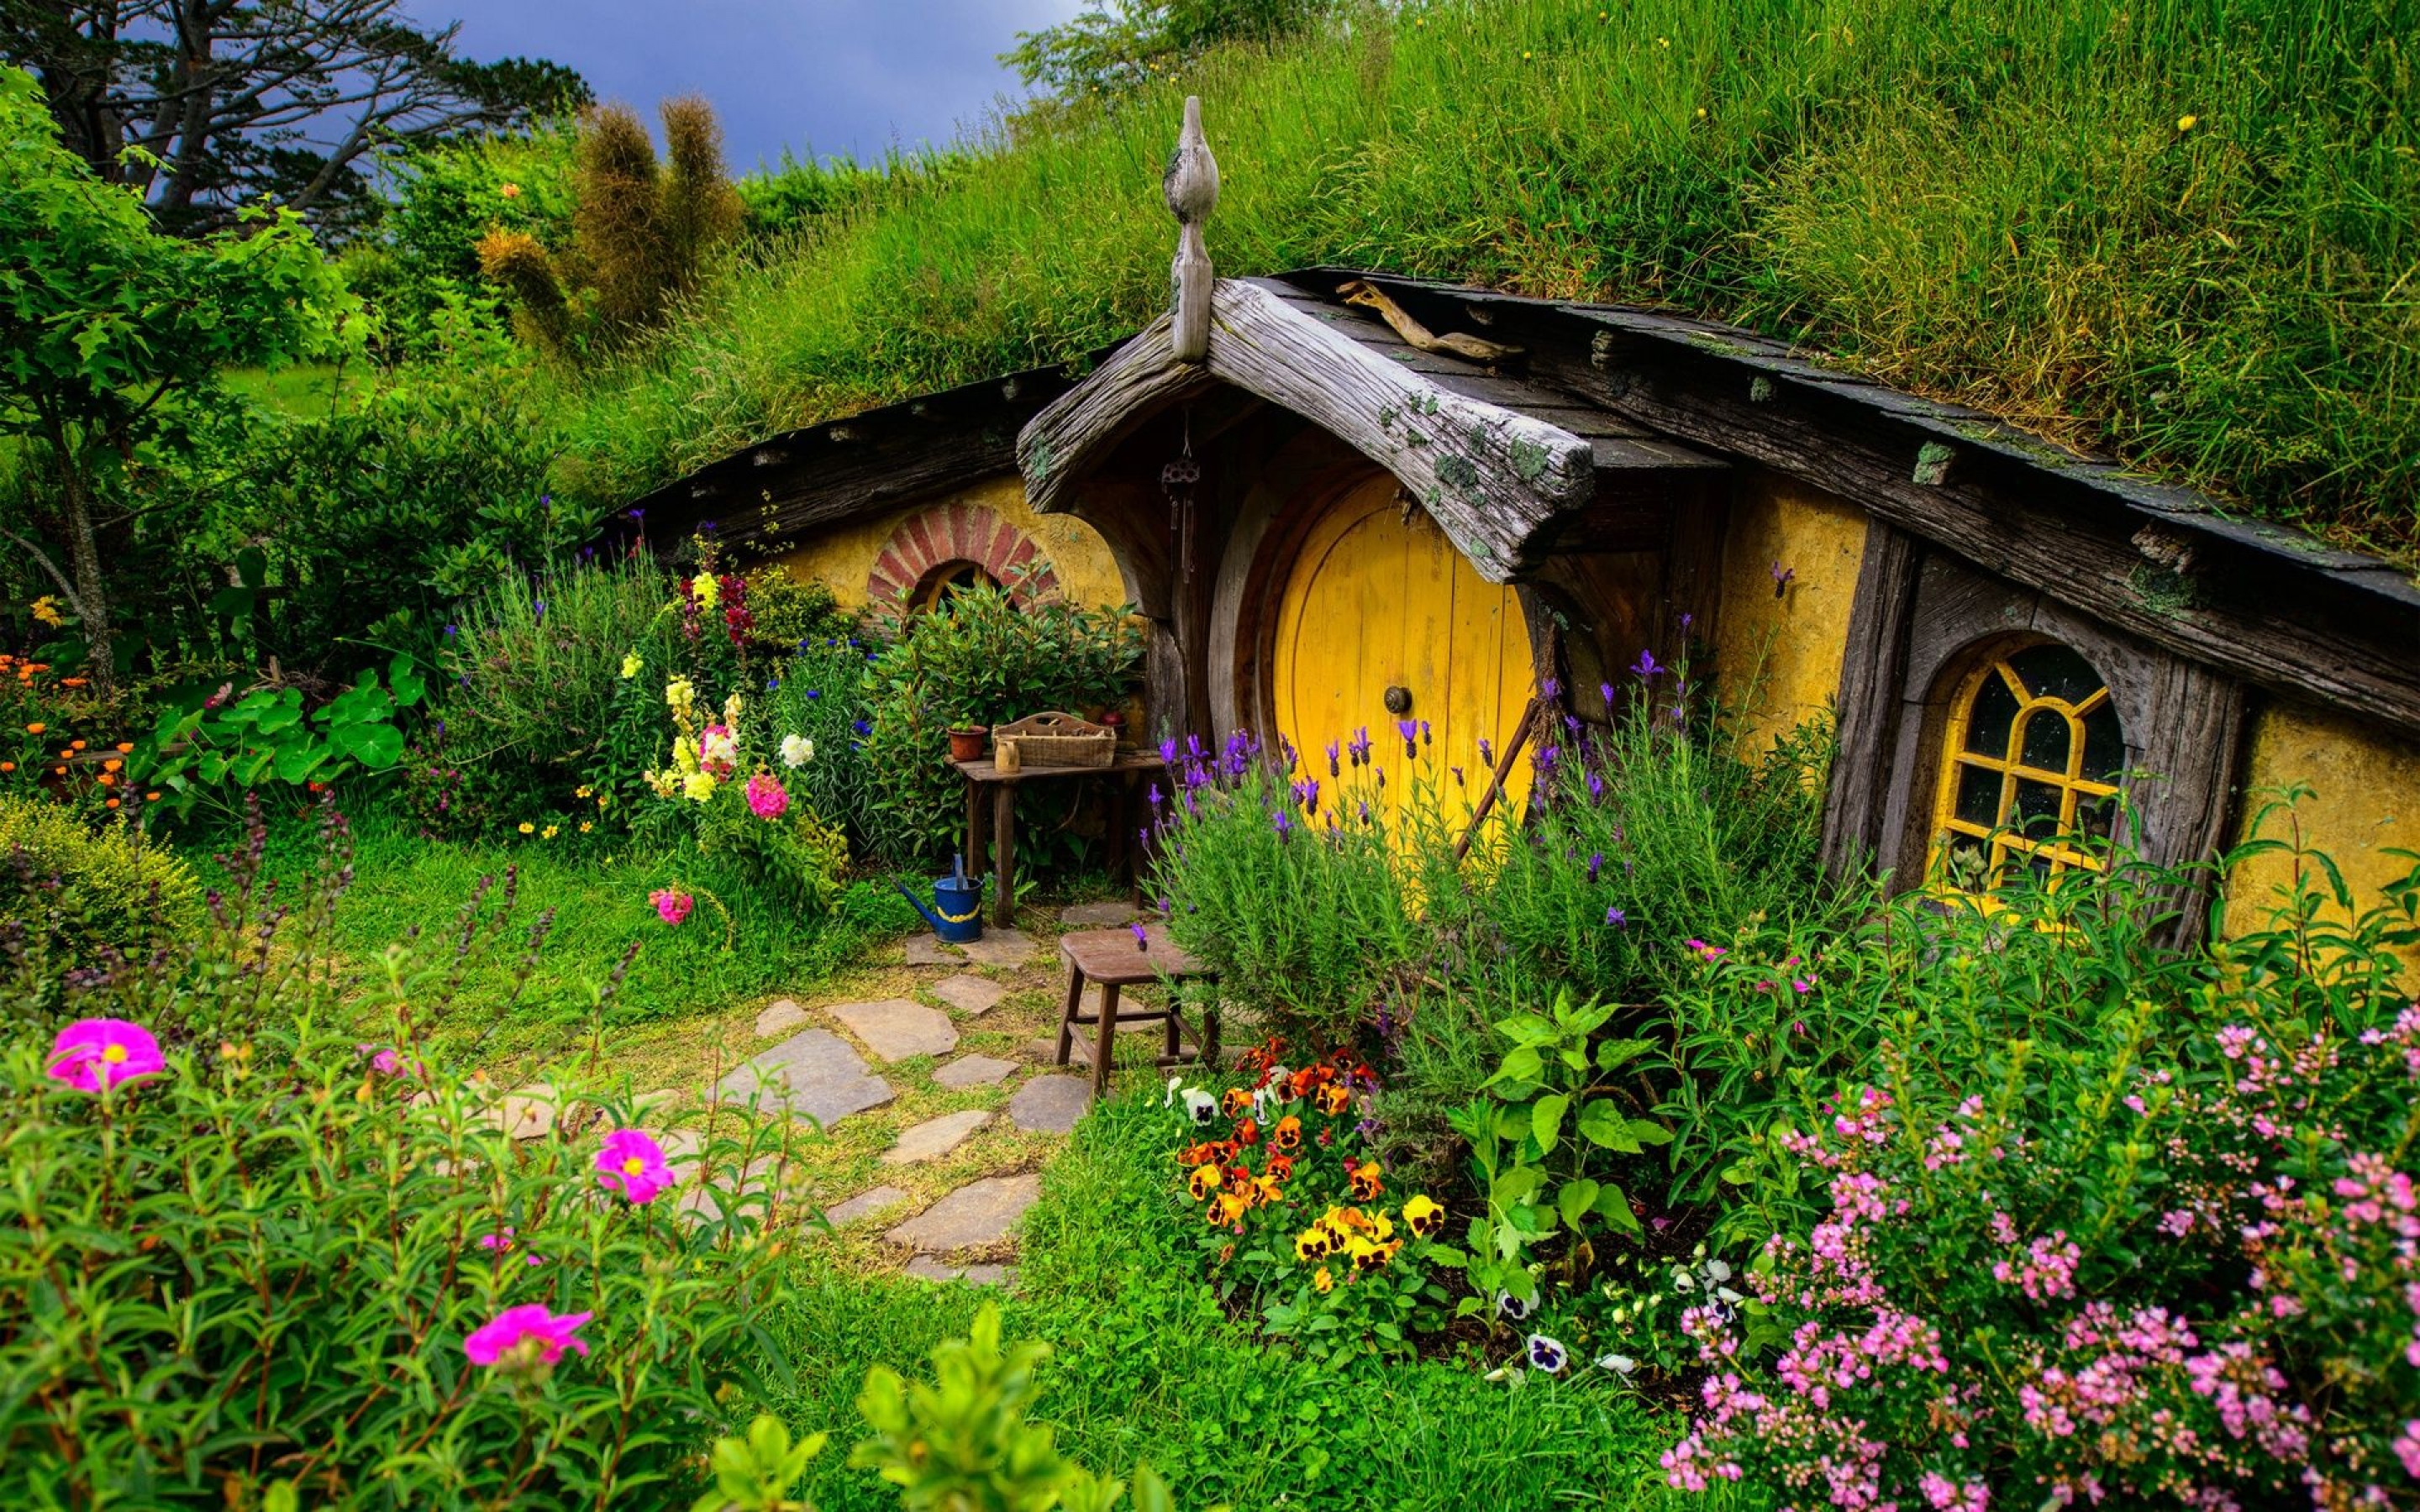 Lord-Of-The-Rings-Hobbit-House-Hill-Flowers-Grass-1800x2880